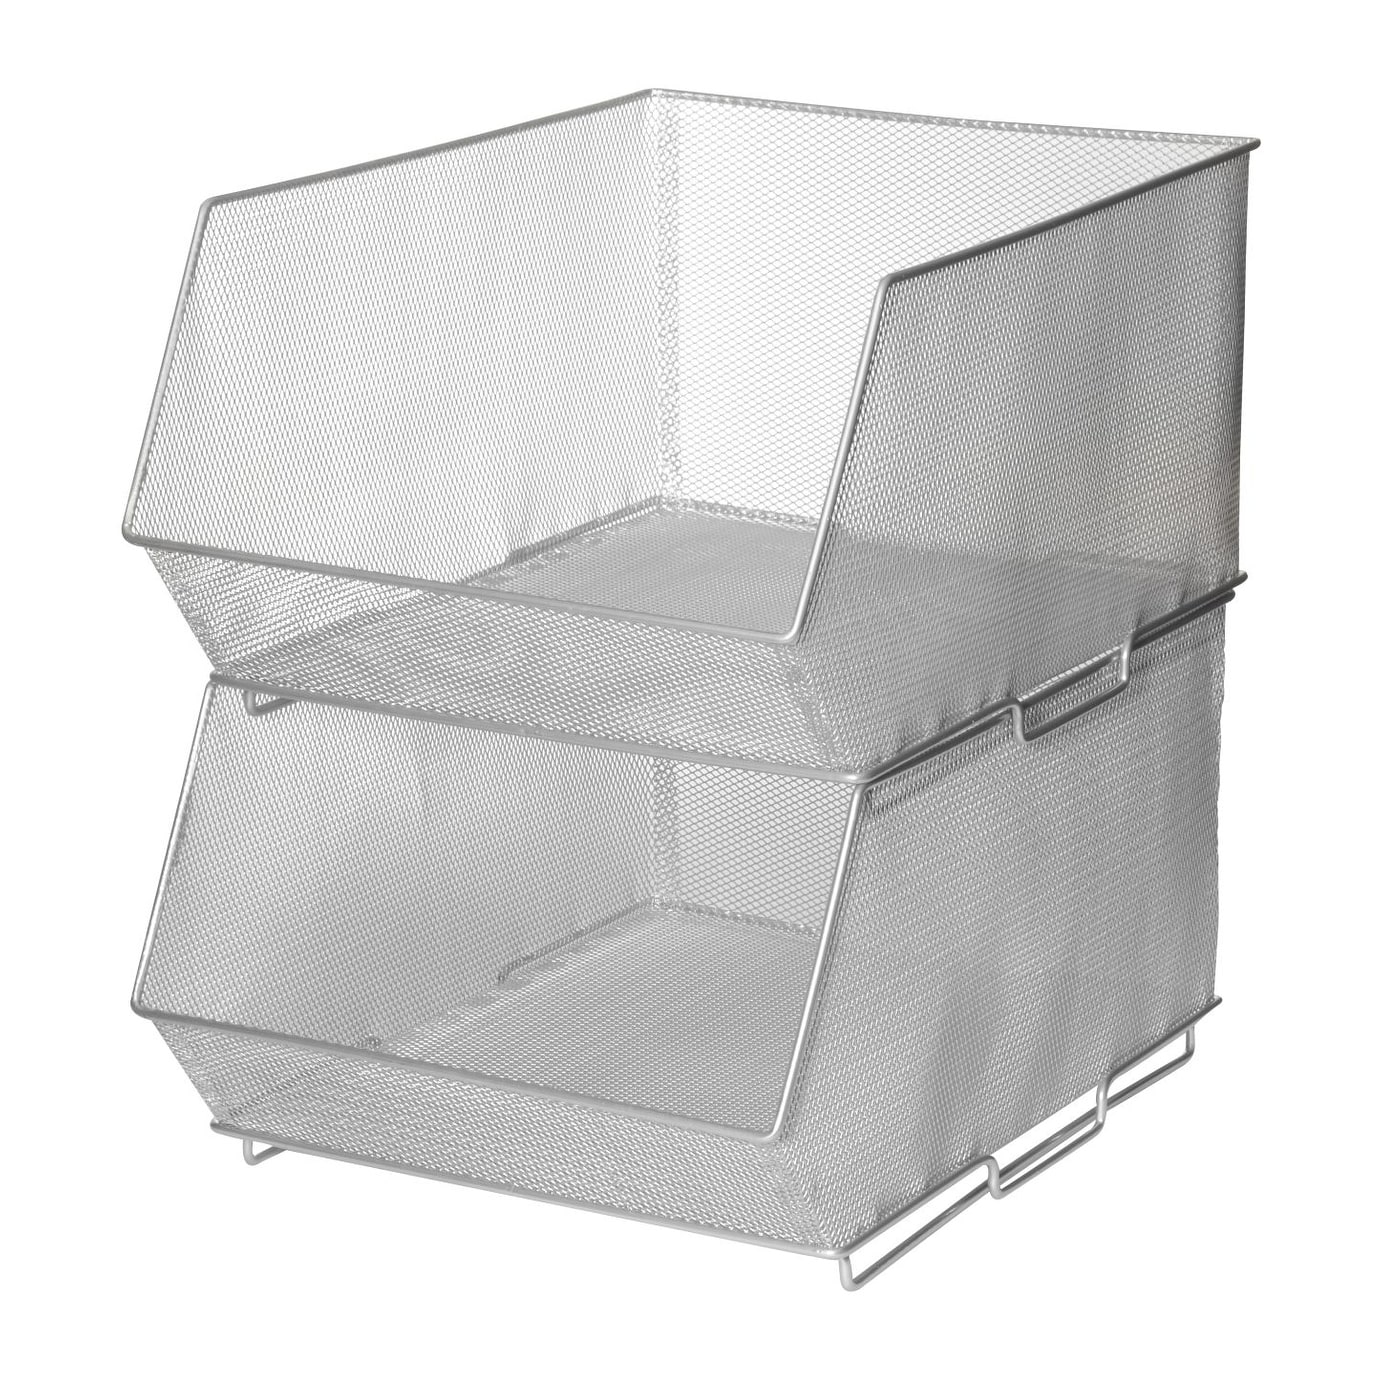 https://ak1.ostkcdn.com/images/products/is/images/direct/bb27176e7e24e60d27491def877ec88c9ae6f400/Mesh-Stacking-Bin-Silver-Storage-Containers-Pantry-Organizers-Great.jpg